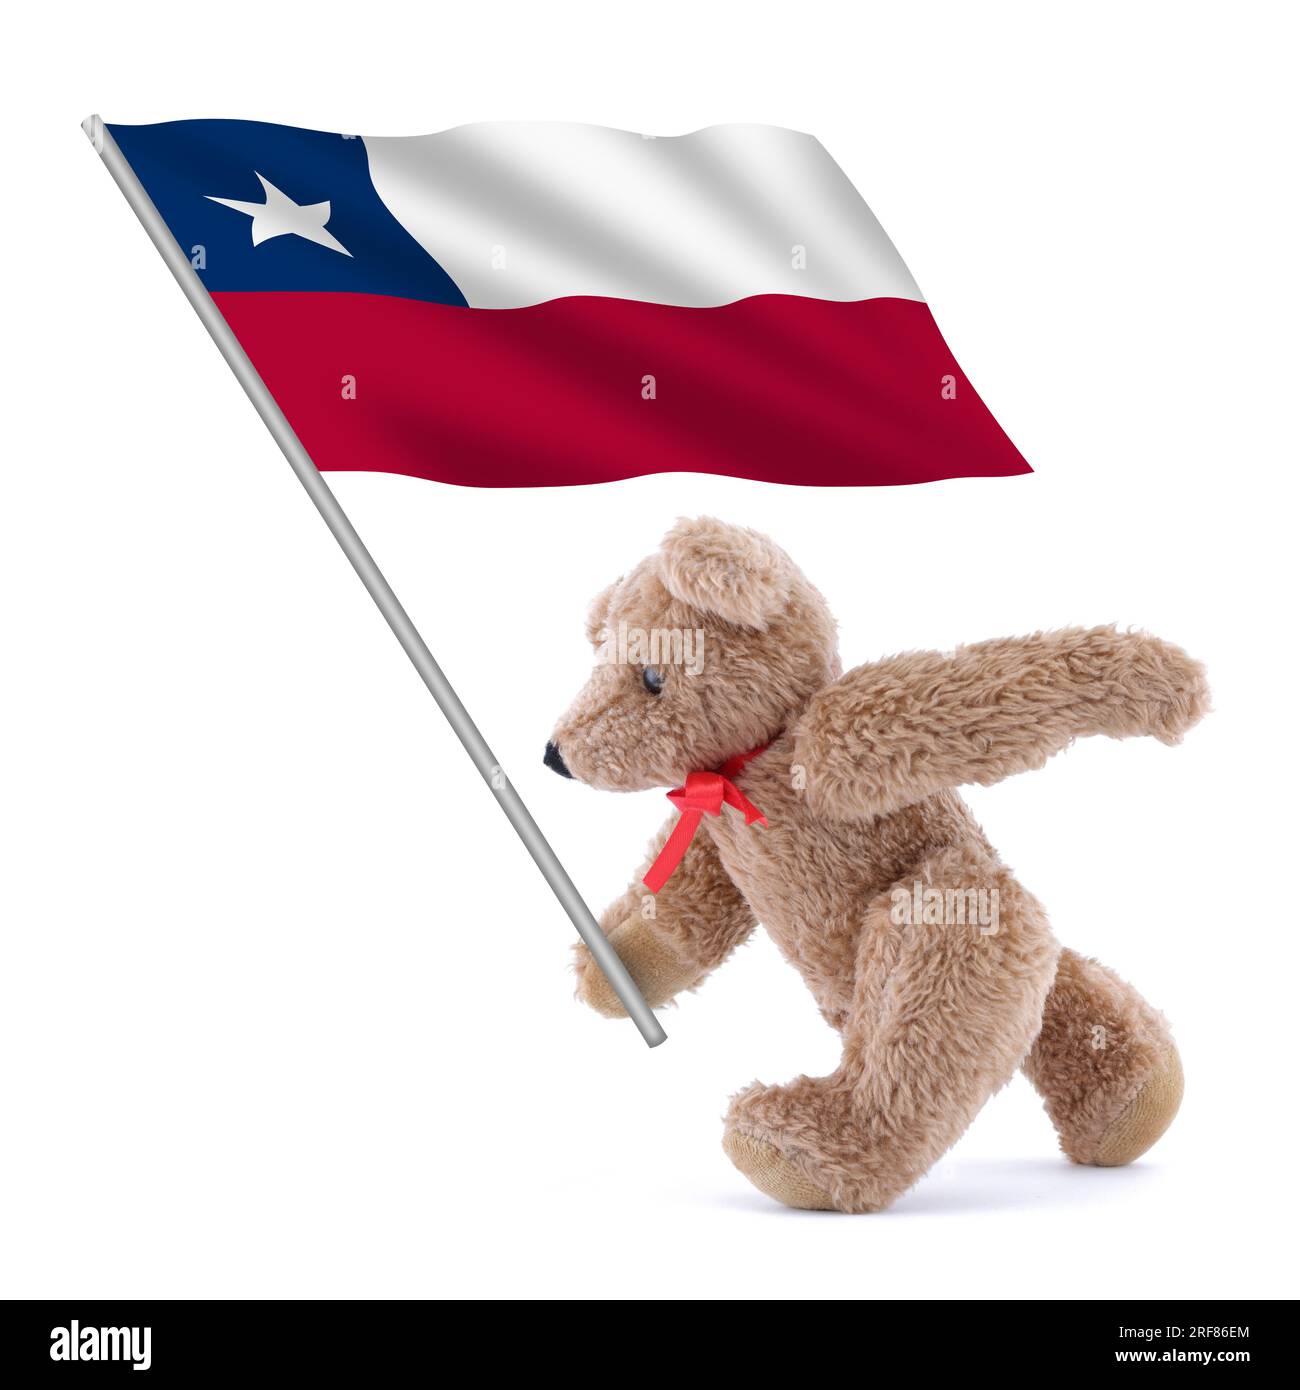 Chile flag being carried by a cute teddy bear Stock Photo